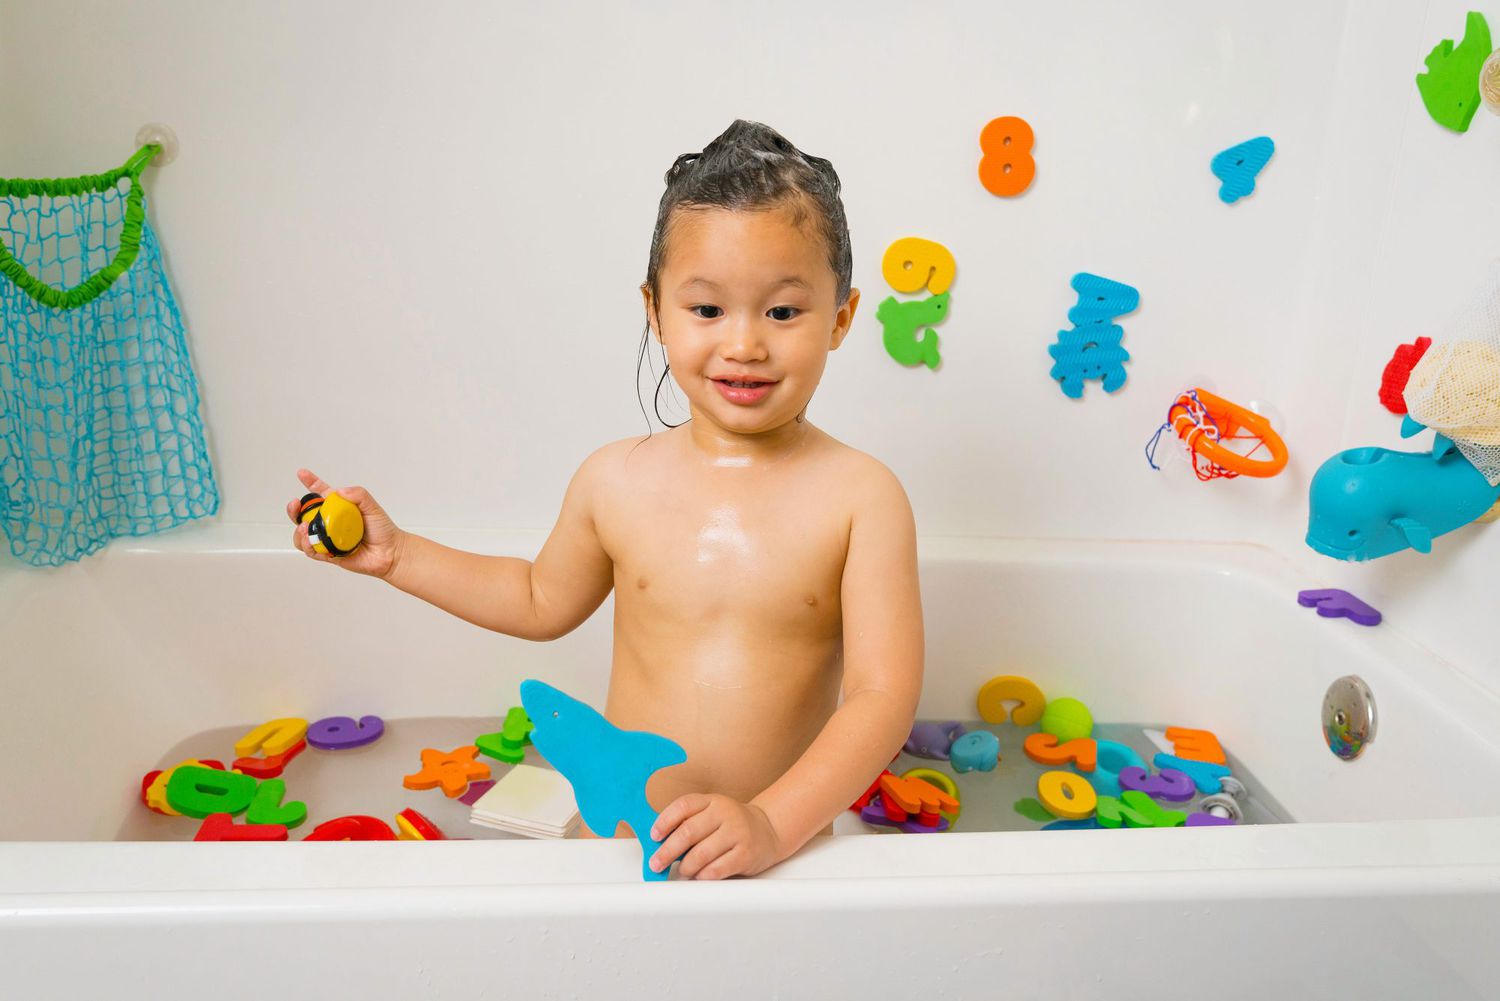 An image of a little boy in a bath tub playing with bath toys.